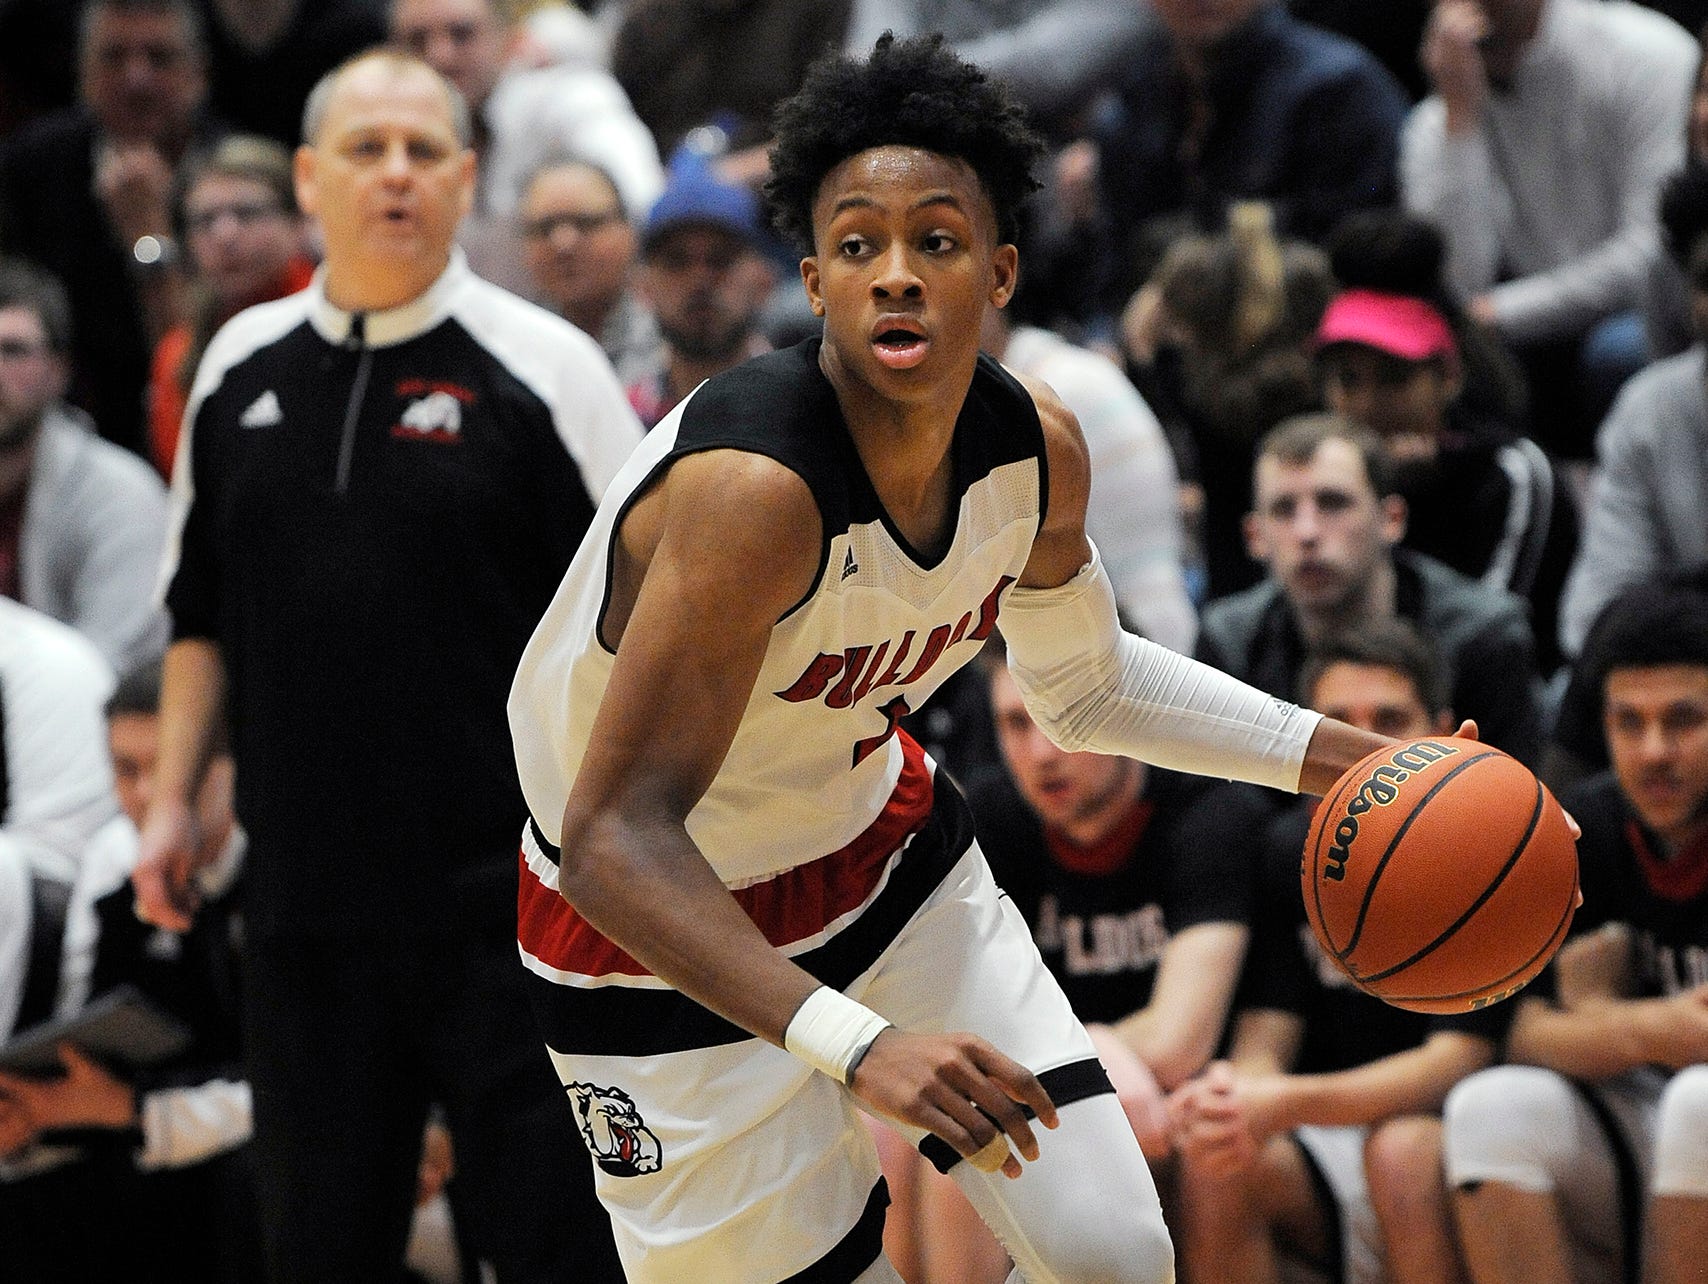 New Albany head coach Jim Shannon (in back) watches as Romeo Langford (1) drives against Providence on Friday at New Albany High School. New Albany won 55-40.